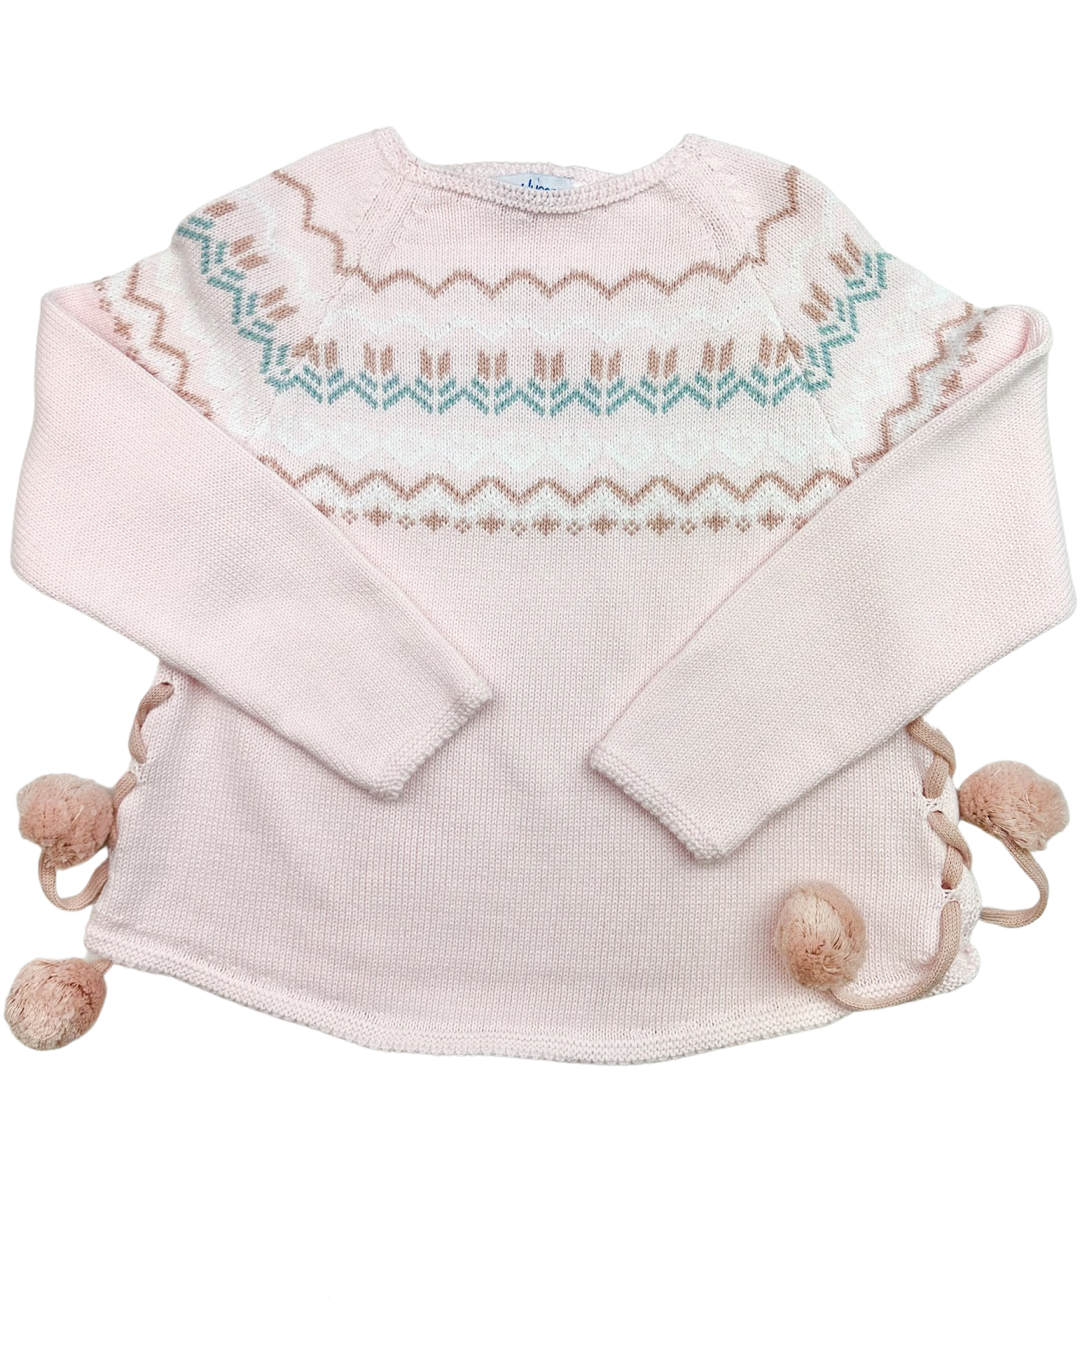 Tunic Sweater With Tulips & Poms - Pink/Green Blue (2T-5)